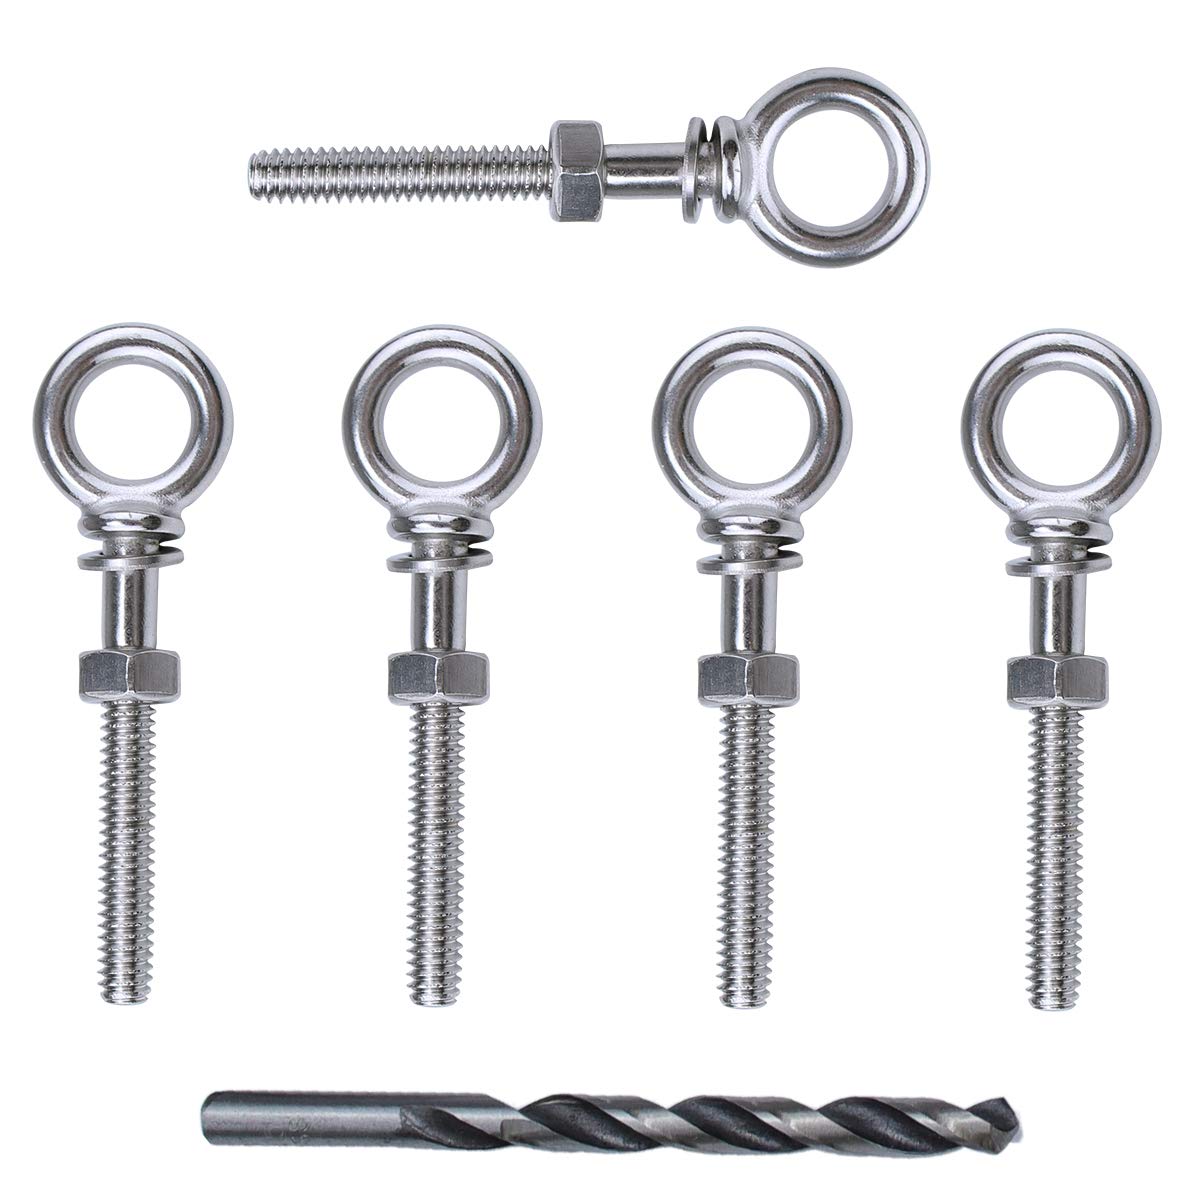 Muzata 5Pack 14-20 Eye Bolt Heavy Duty Shoulder Lifting Ring Threaded Eyebolts With Nuts Washers T316 Stainless Steel Marine Gra